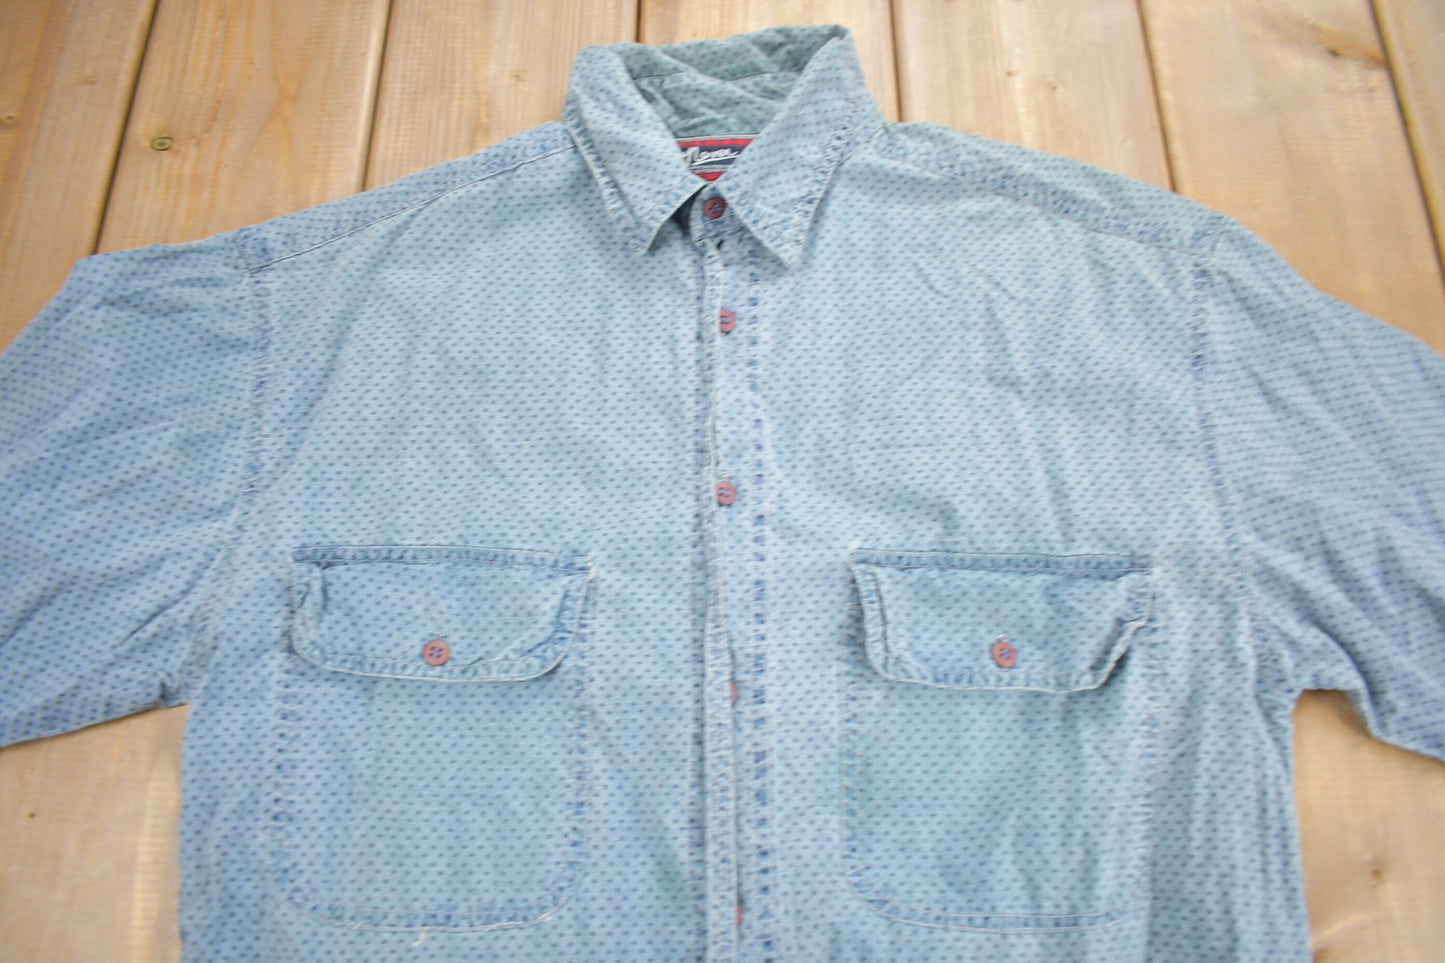 Vintage 1990s Cover Dotted Button Up Shirt / Union Made / Outdoorsman / Hiking Shirt